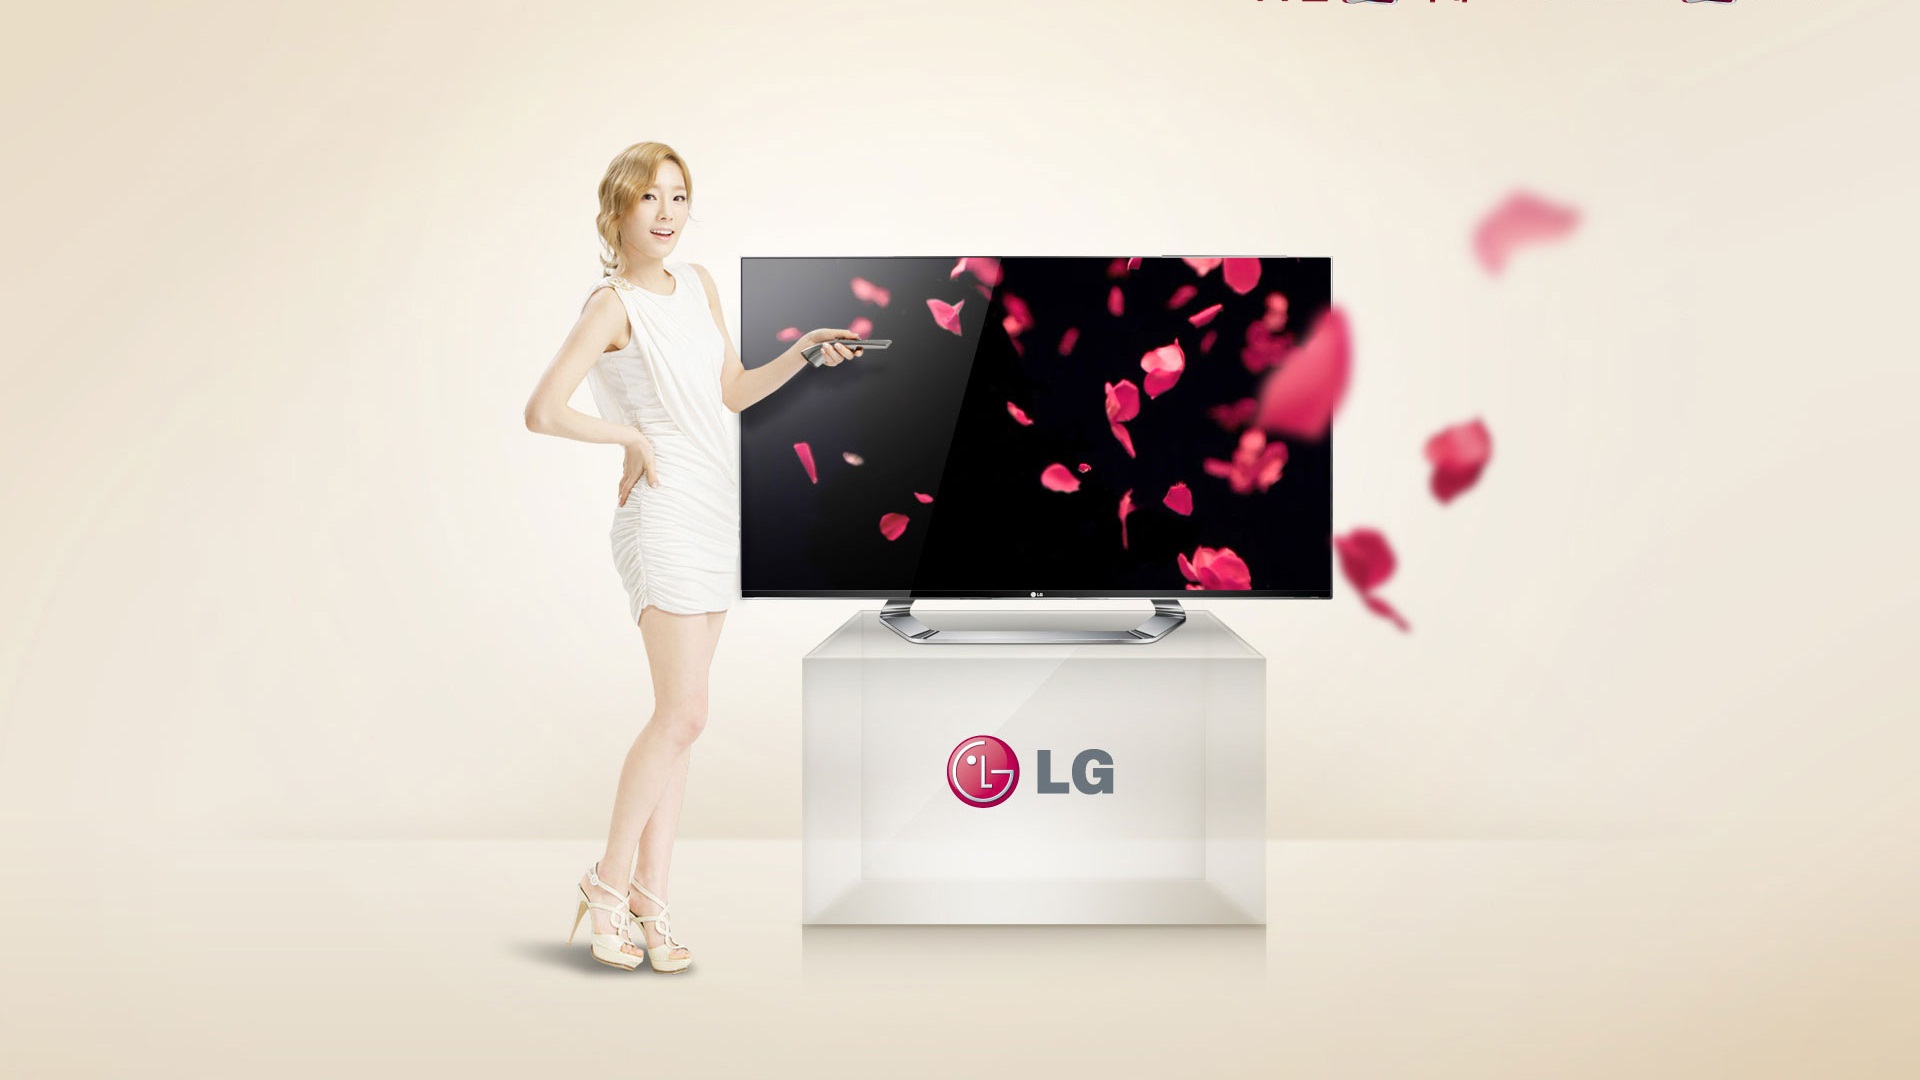 Girls Generation ACE and LG endorsements ads HD wallpapers #14 - 1920x1080